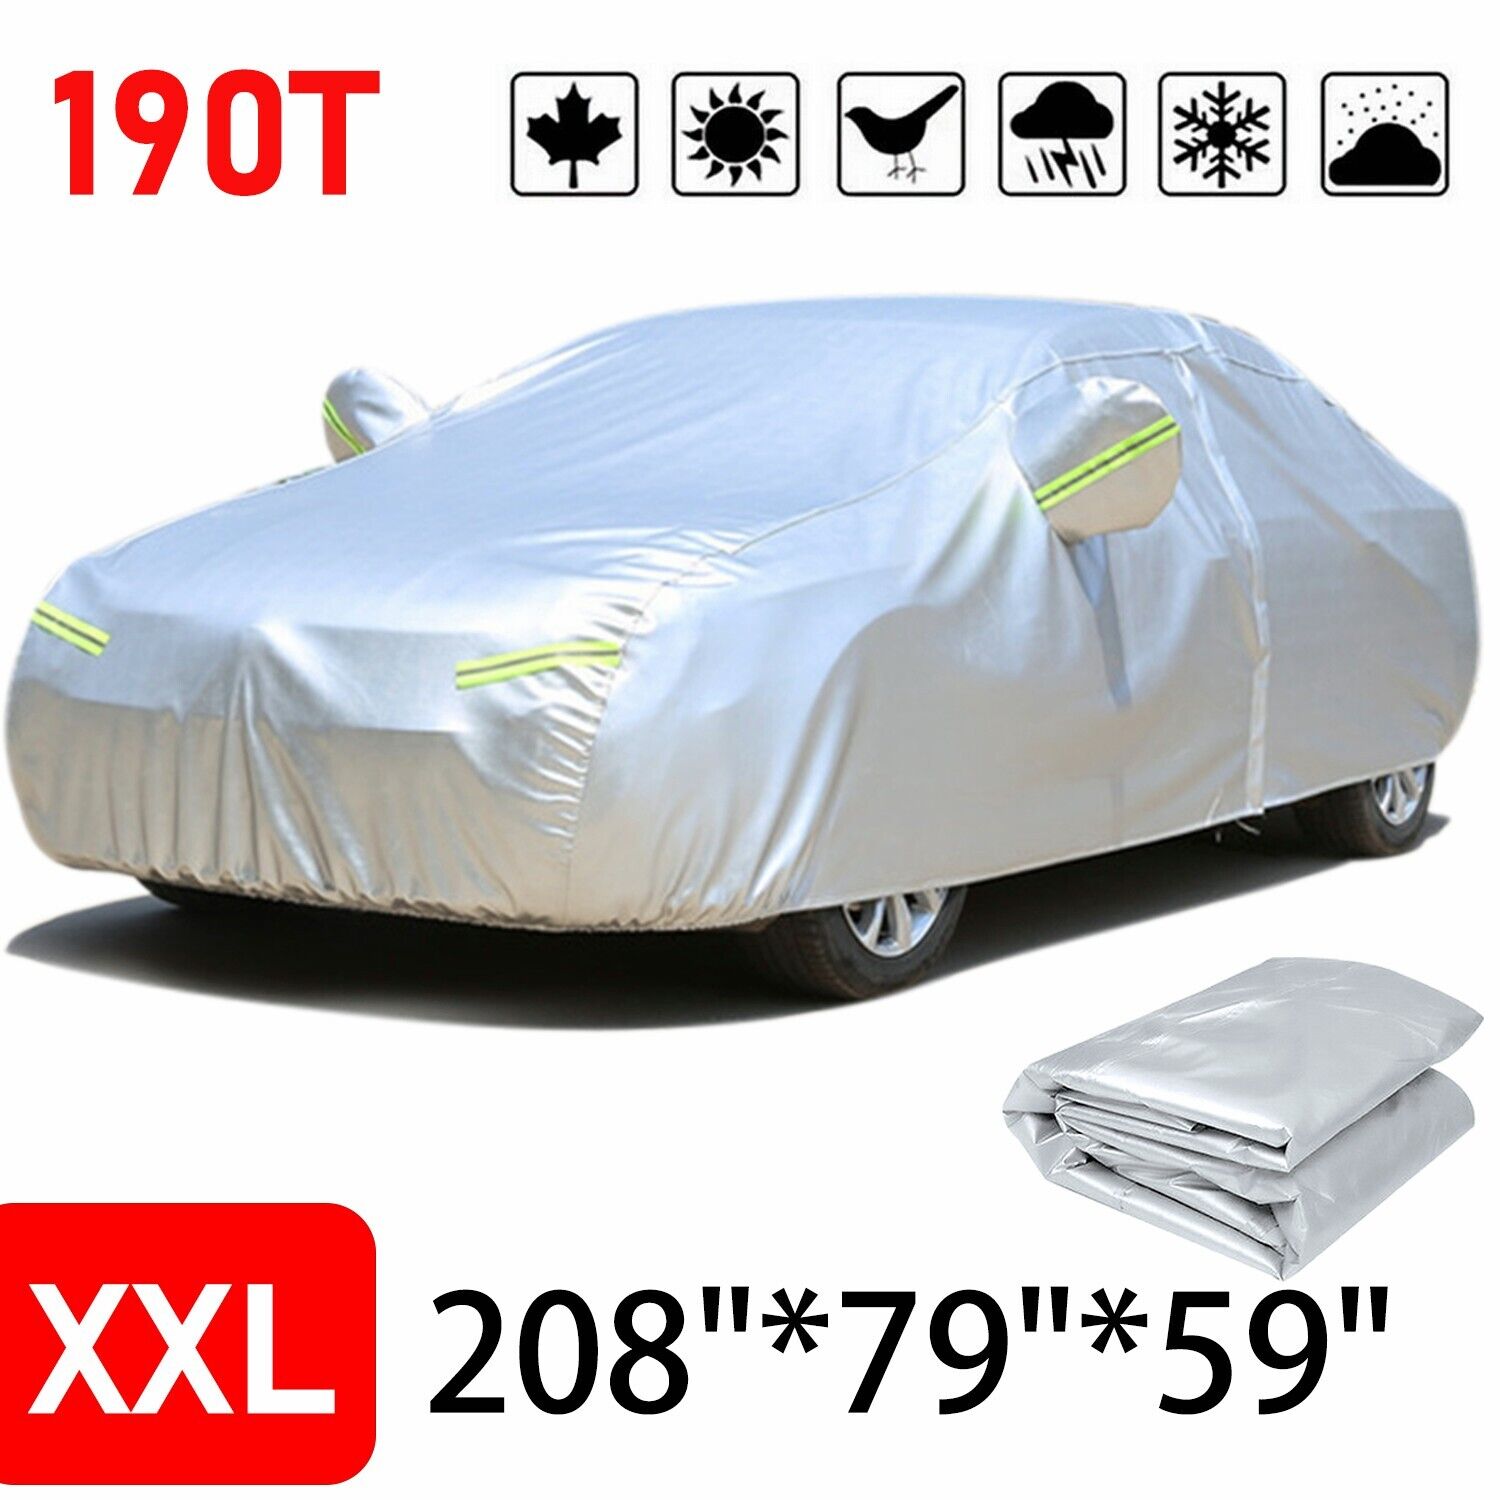 Full Car Cover for Outdoor Sun Dust Scratch Rain Snow Waterproof Breathable